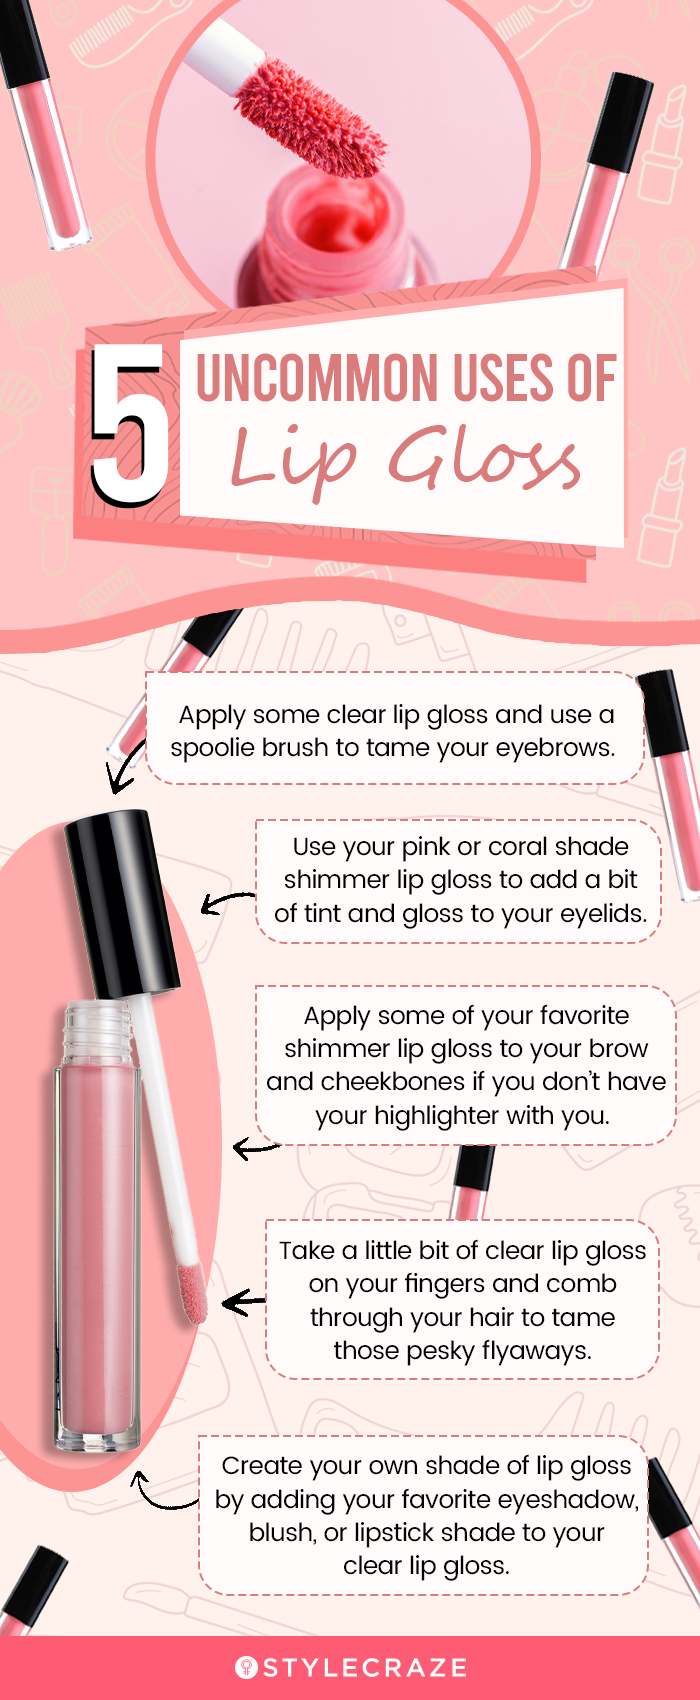 Uncommon Uses Of Lip Gloss (infographic)